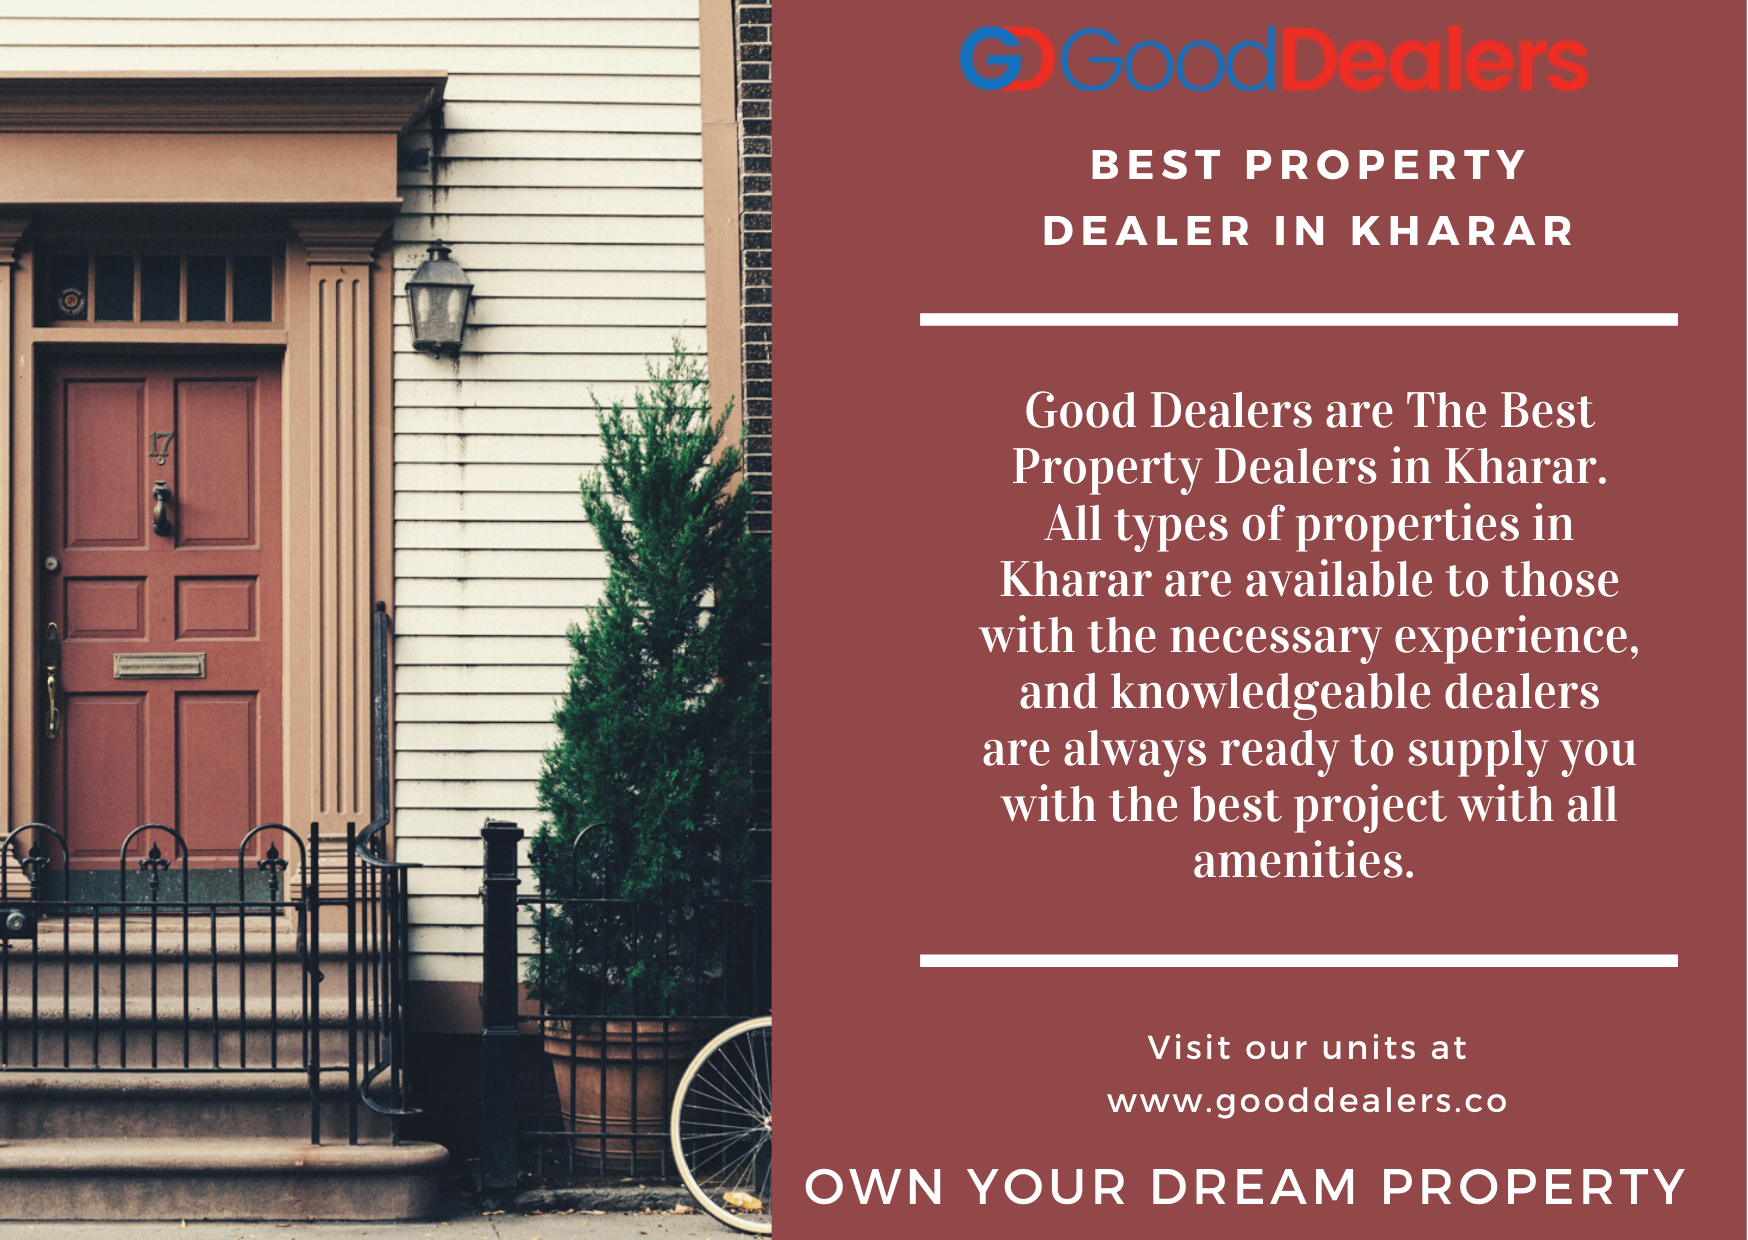 Good Dealers are The Best Property Dealers in Kharar. All types of properties in Kharar are available to those with the necessary experience, and knowledgeable dealers are always ready to supply you with the best project with all amenities. Please visit our website for further information. https://bit.ly/3HxCp3z